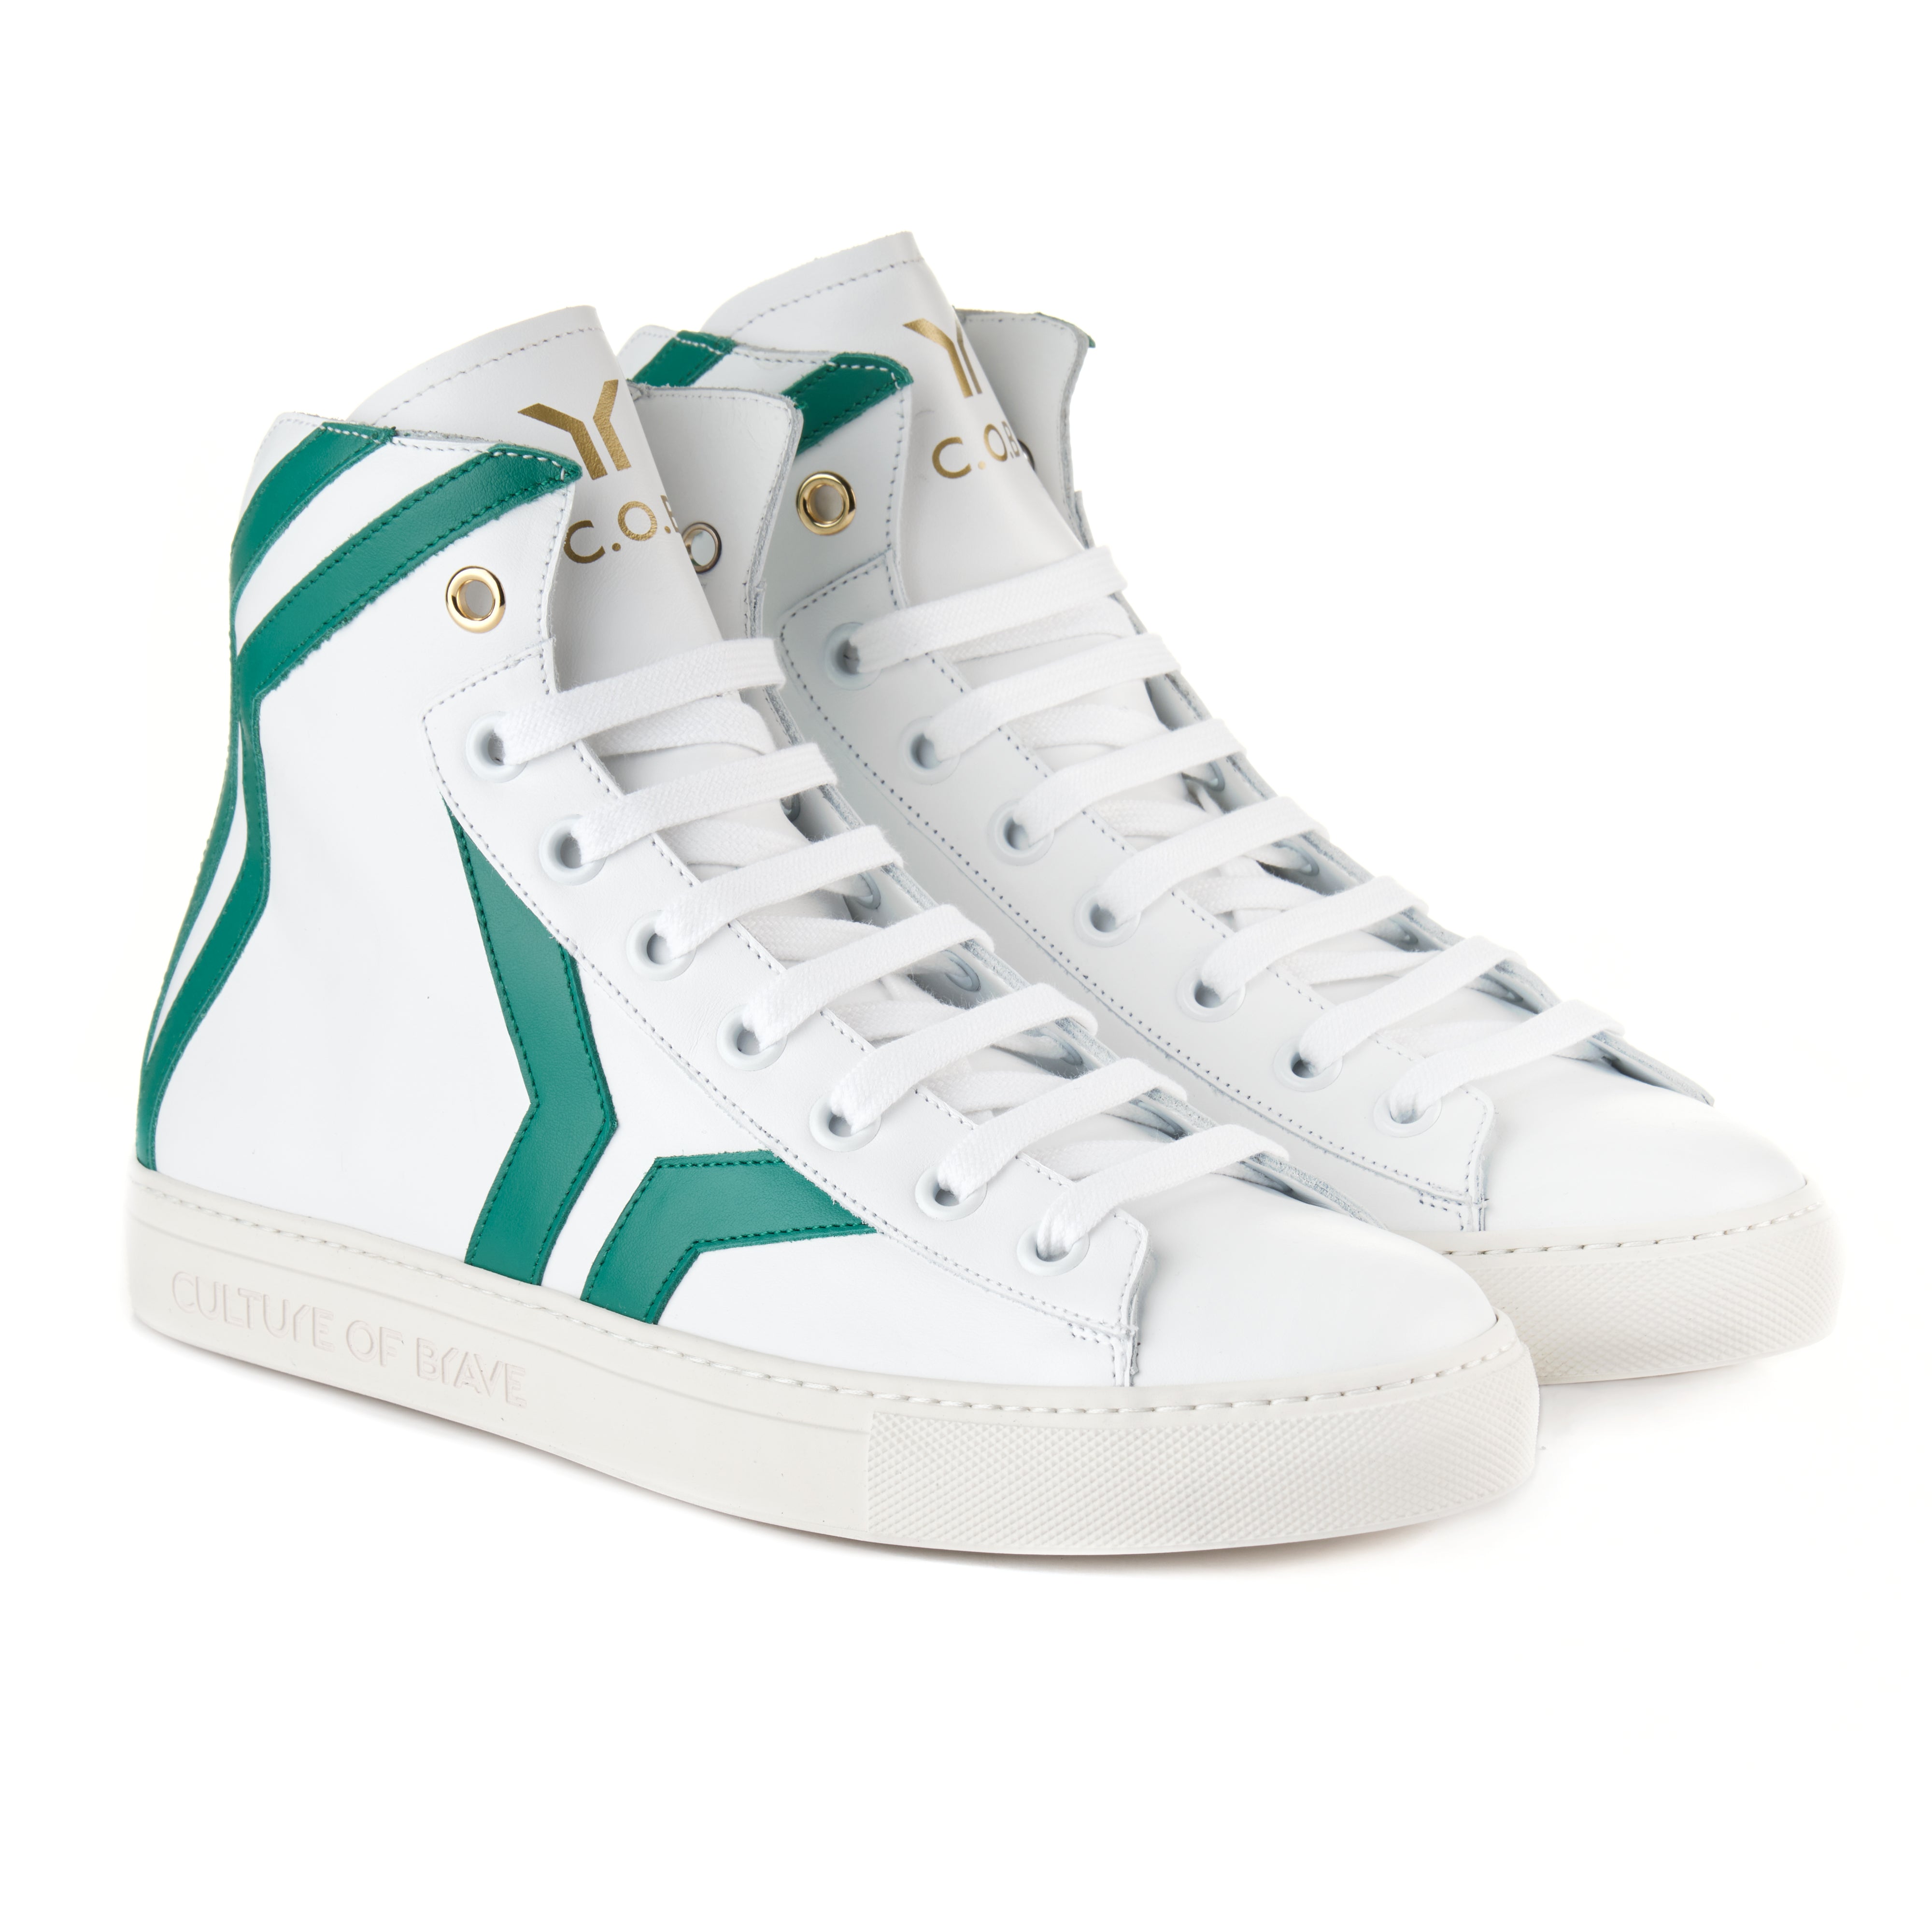 Resilient S16 Women White leather green wing mid cut